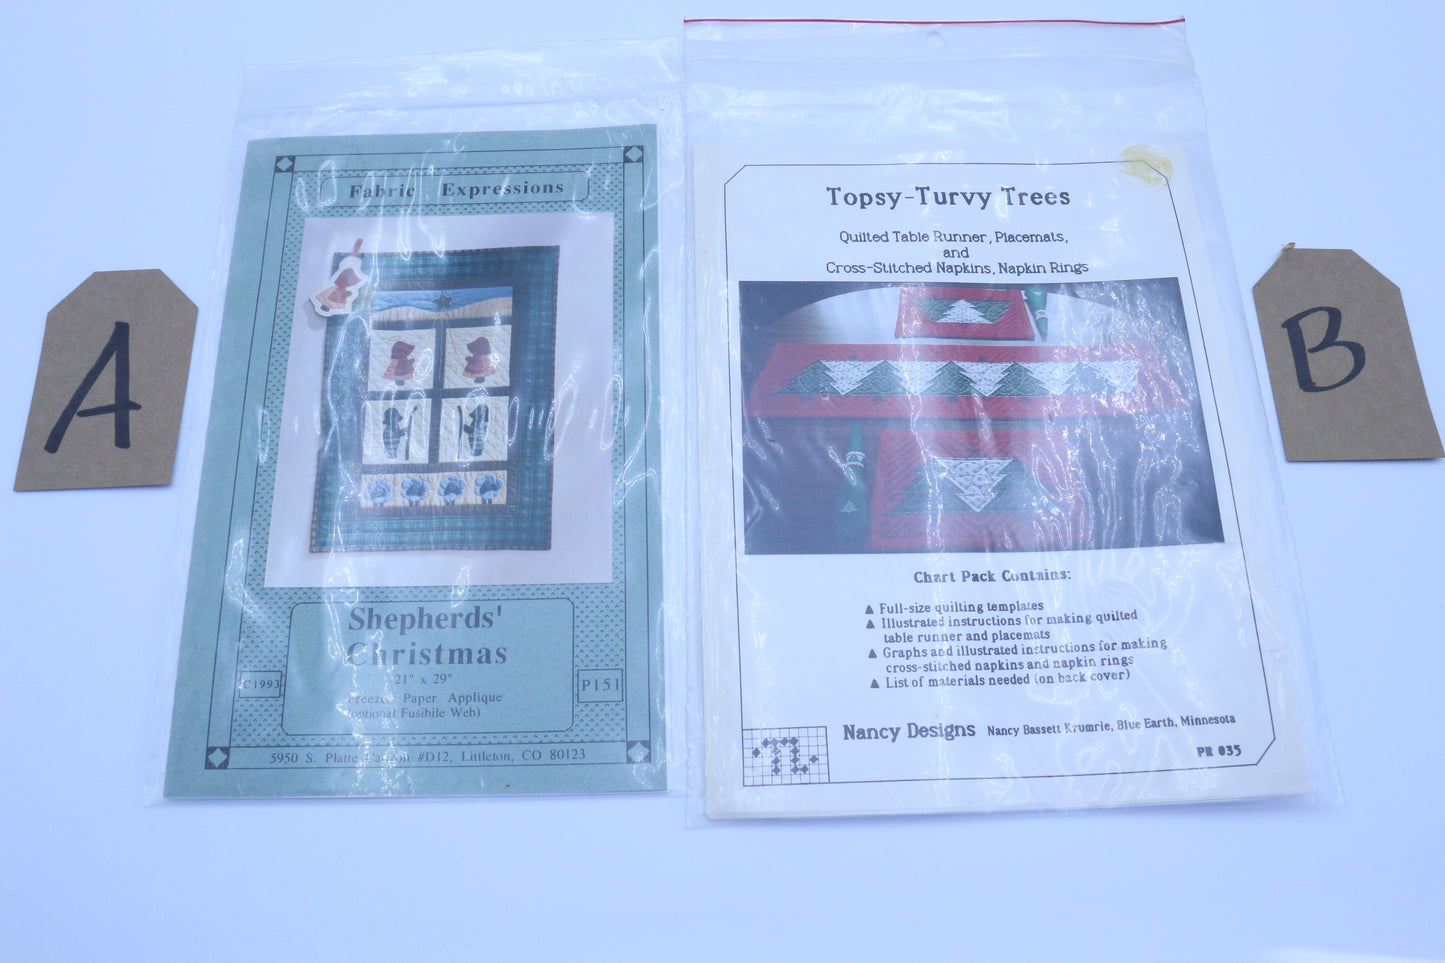 Shepards Christmas Quilt Pattern or Topsy Turvy Trees Table Runner Pattern PK154